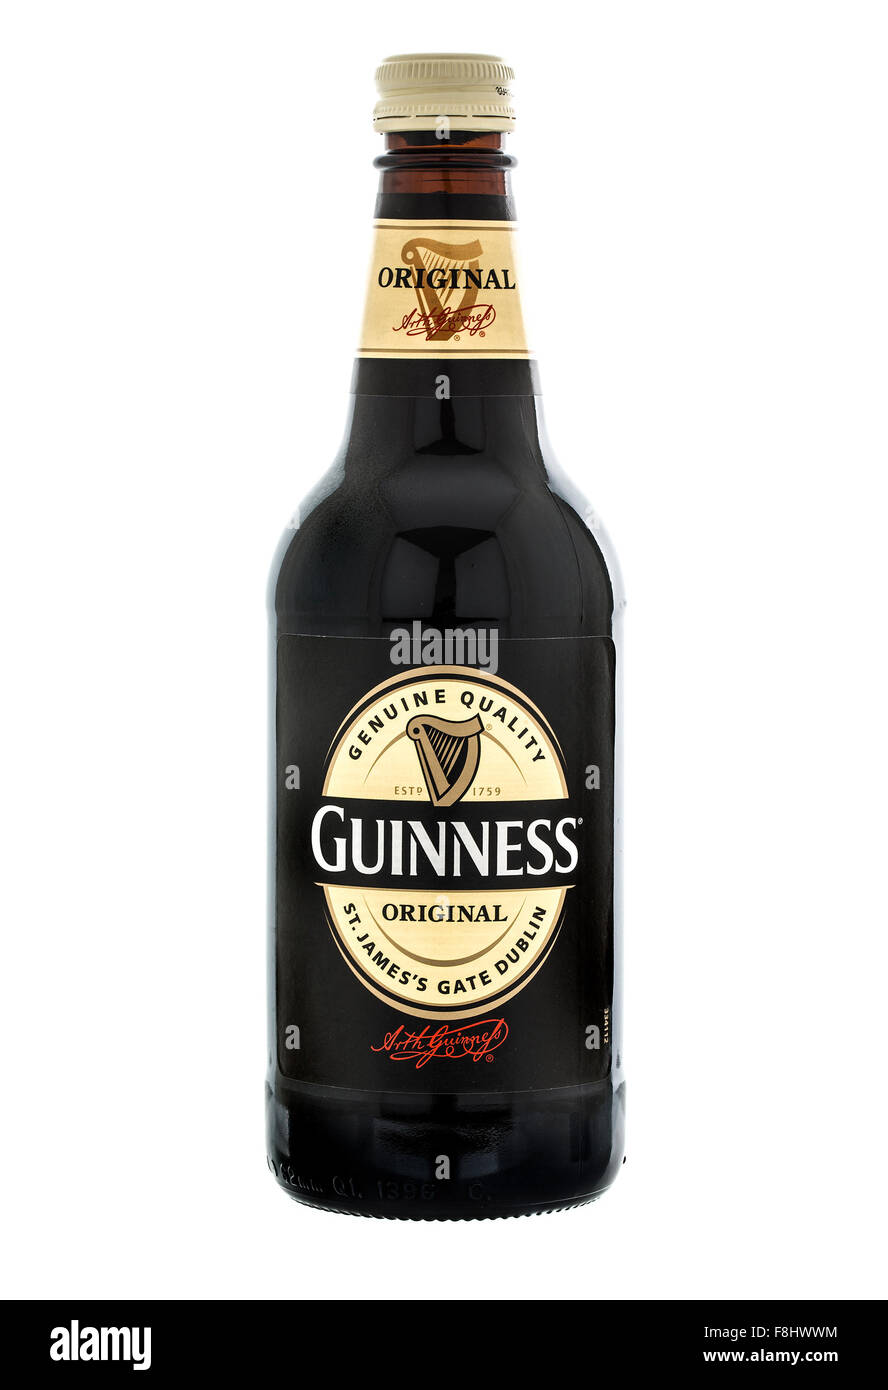 Bottle of Original Guinness on a White Background Stock Photo - Alamy